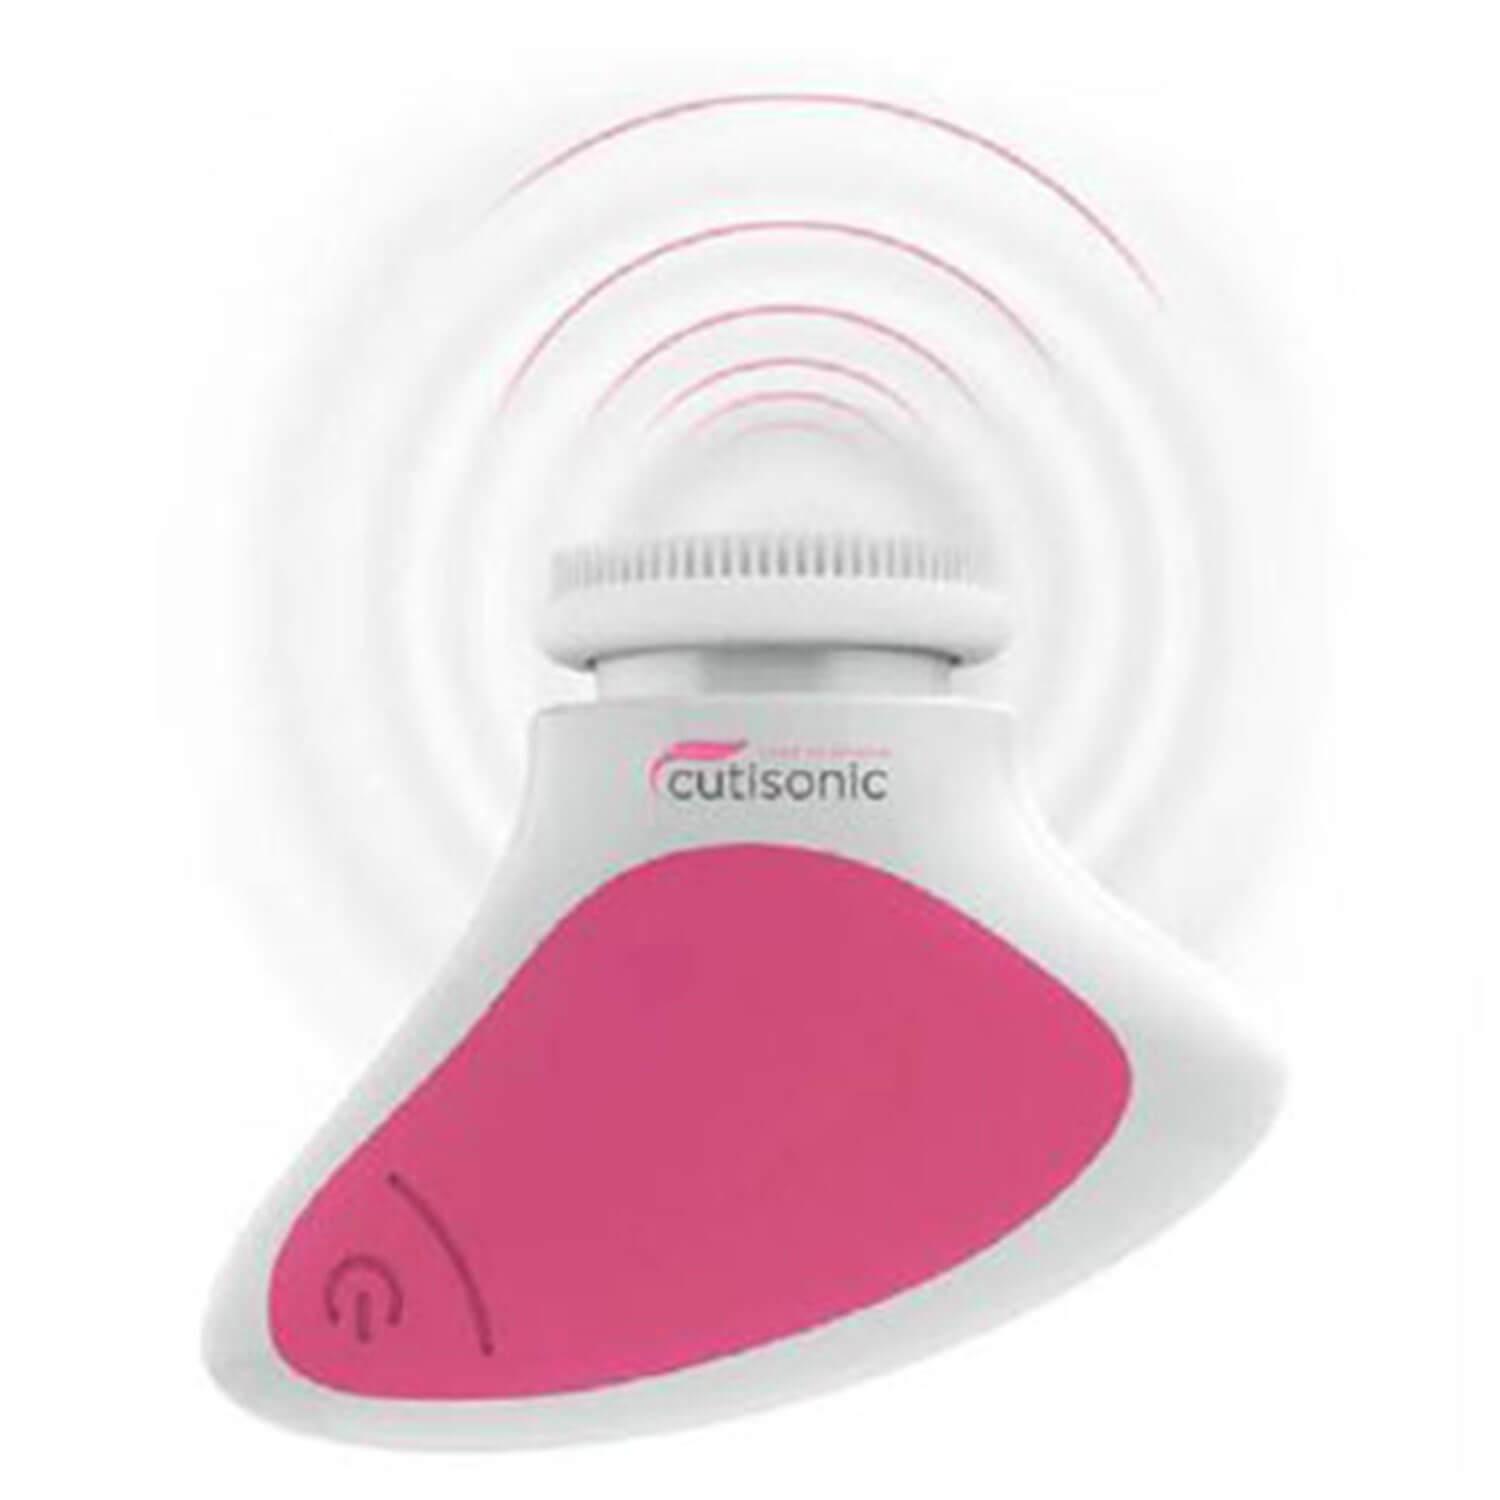 Cutisonic - Ultrasonic face care device Two